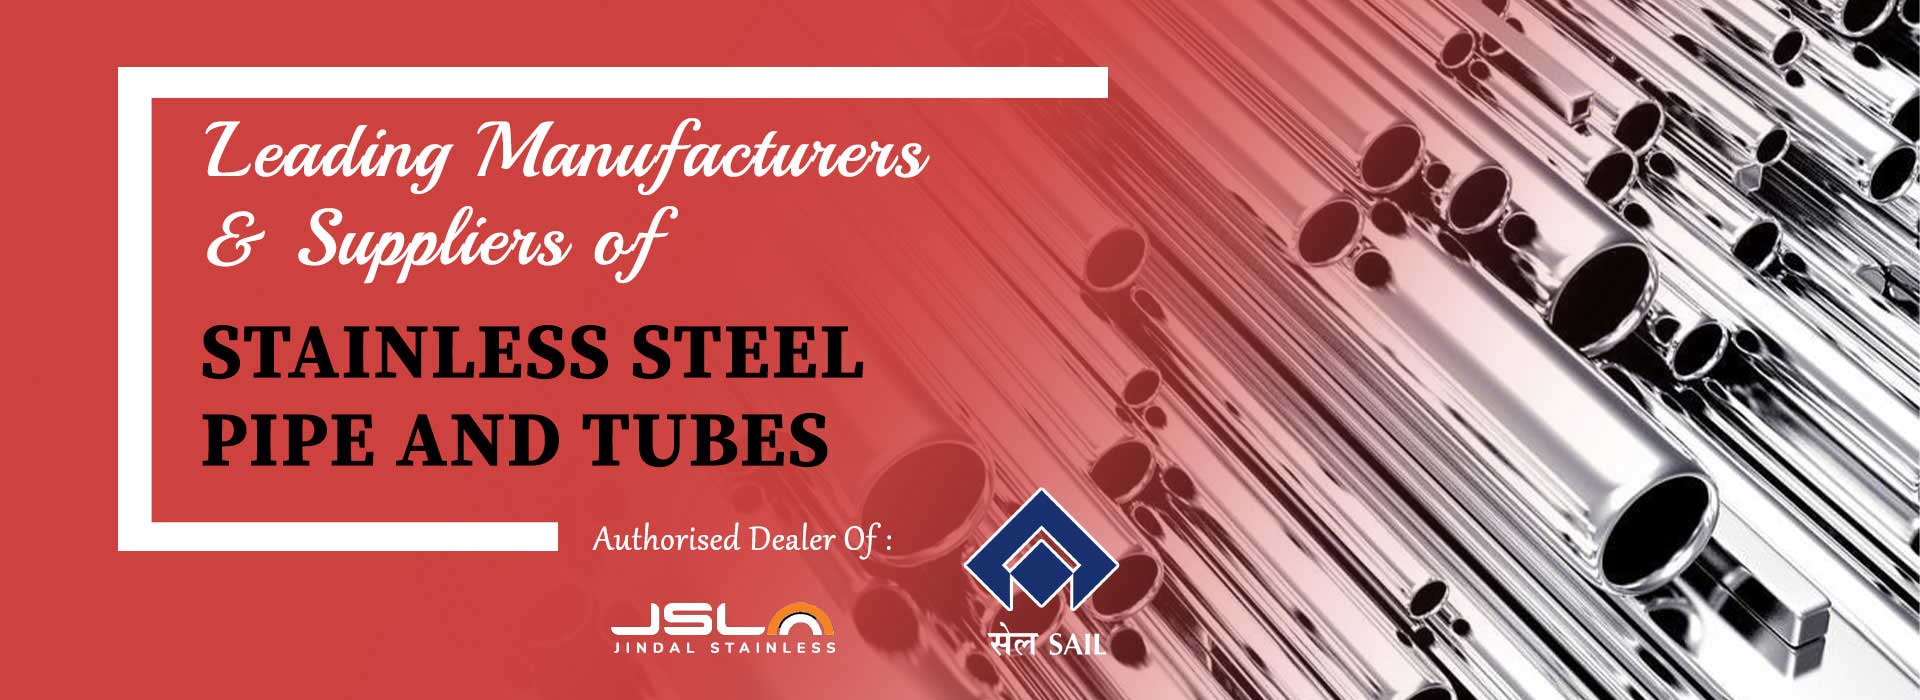 Stainless Steel Pipe and Tubes Manufacturers in Nagpur